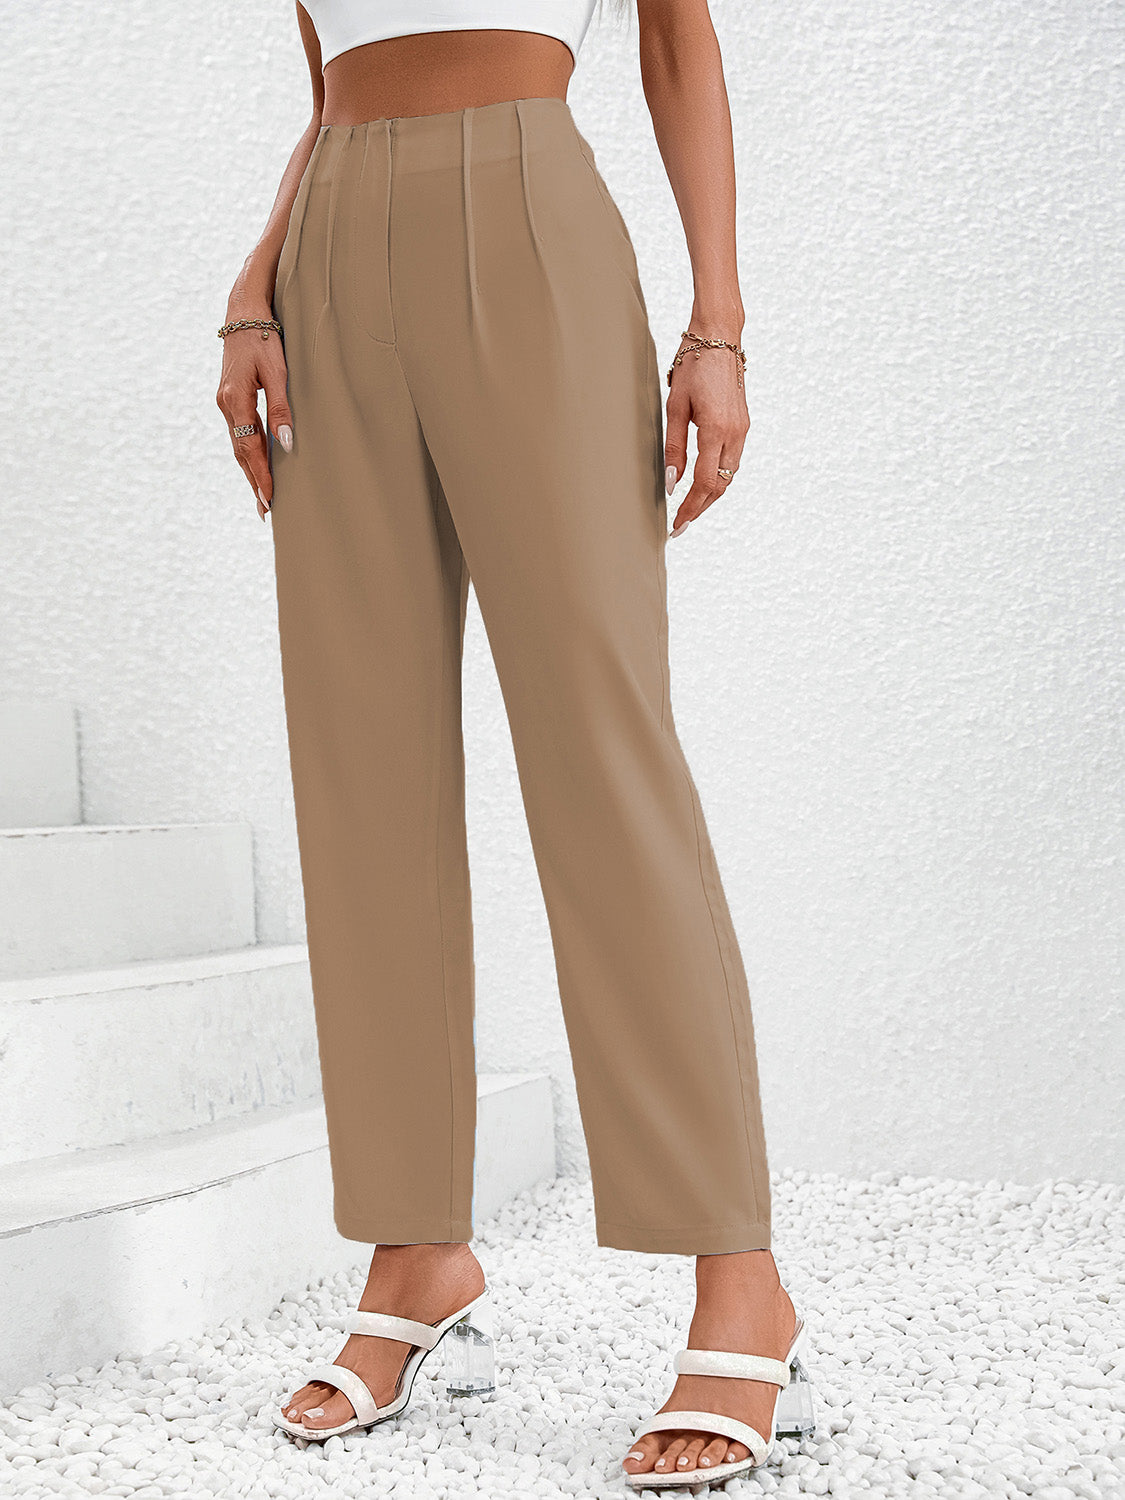 Ruched Long Casual Pants